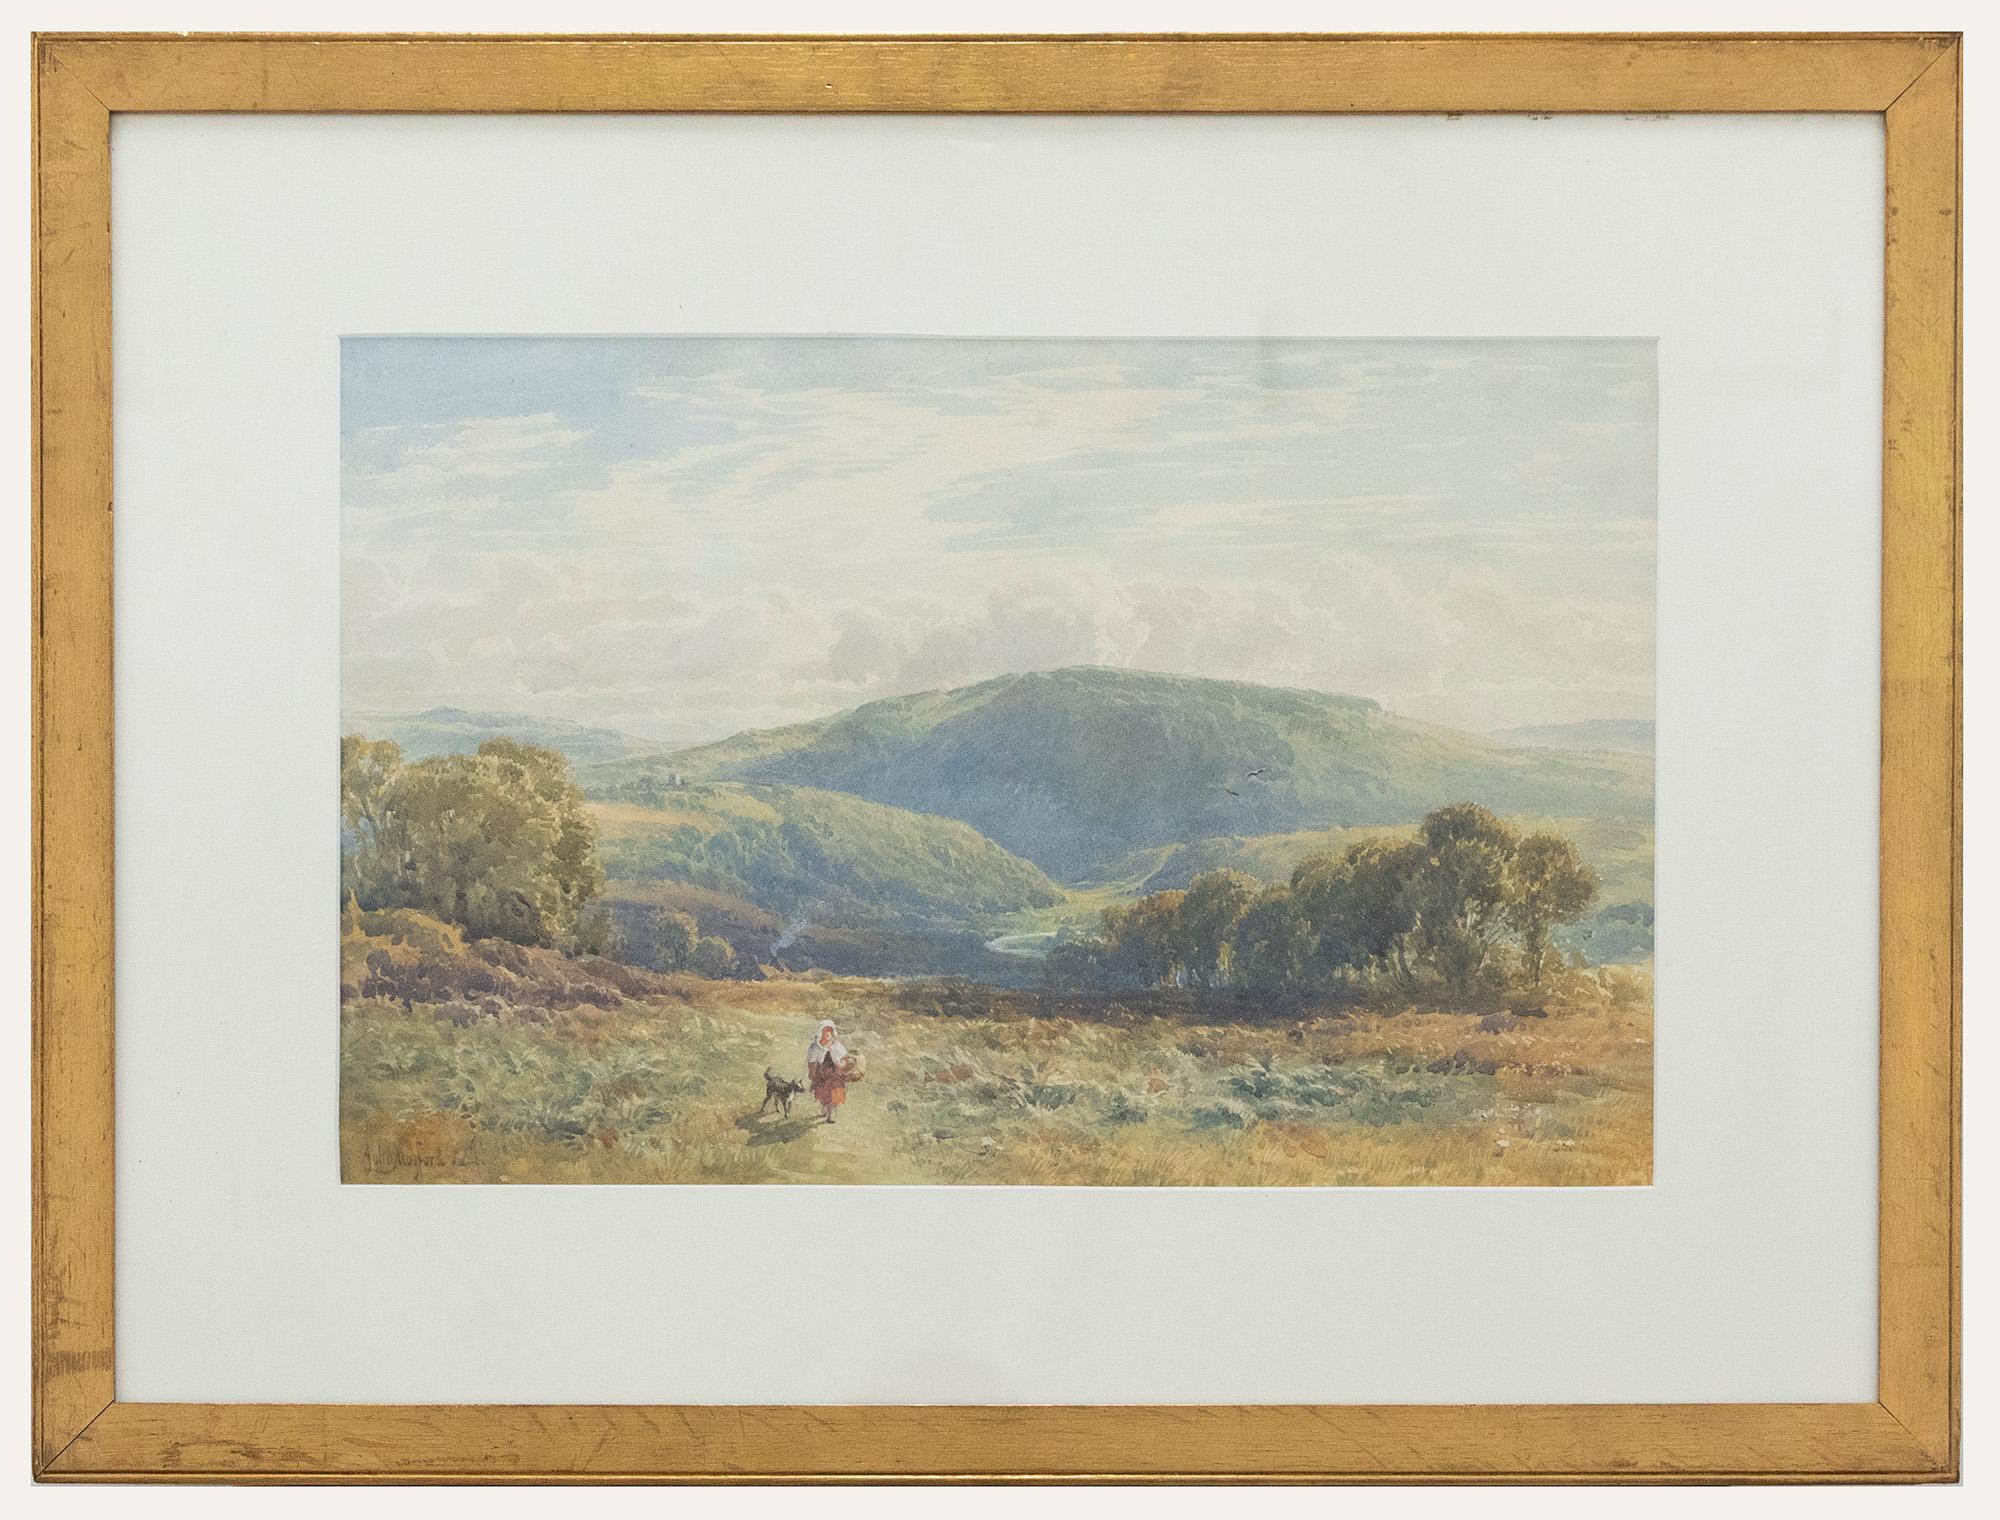 A delightful watercolour scene by the well listed English artist John Mogford RA (1821-1885). The Painting depicts a vast valley landscape with a female figure leaving for the day, accompanied by her dog. The lady's cottage can just be seen on the